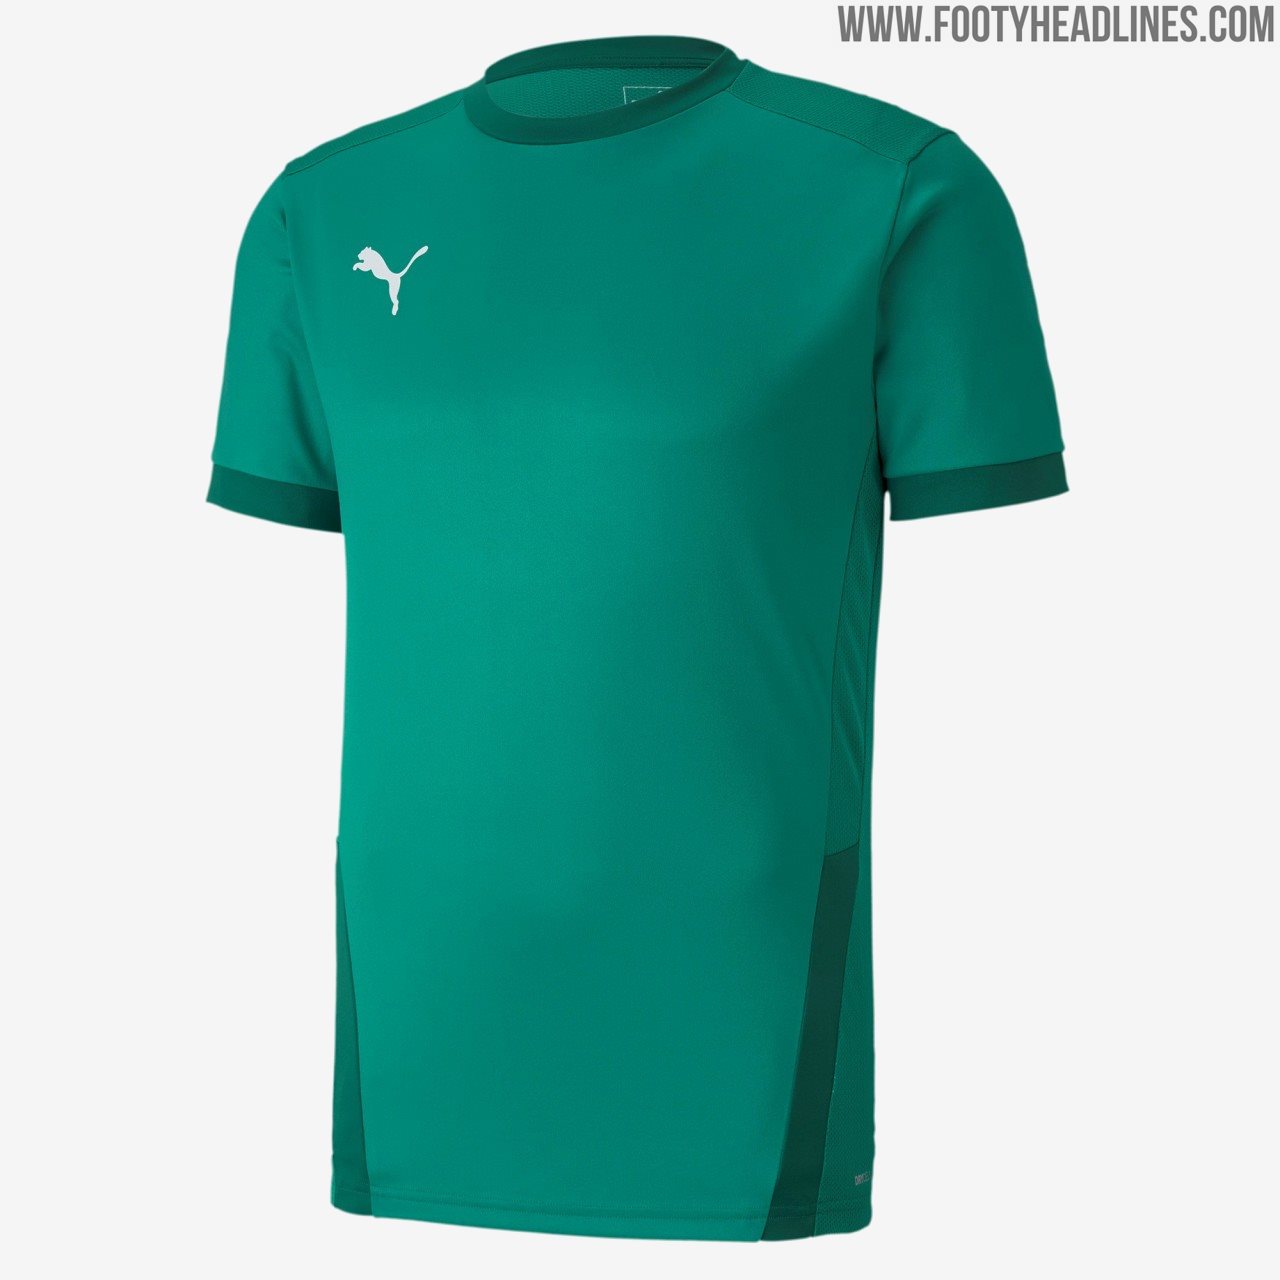 Full Puma 2020-21 Teamwear Kit Collection Revealed - 10 Different Kits ...